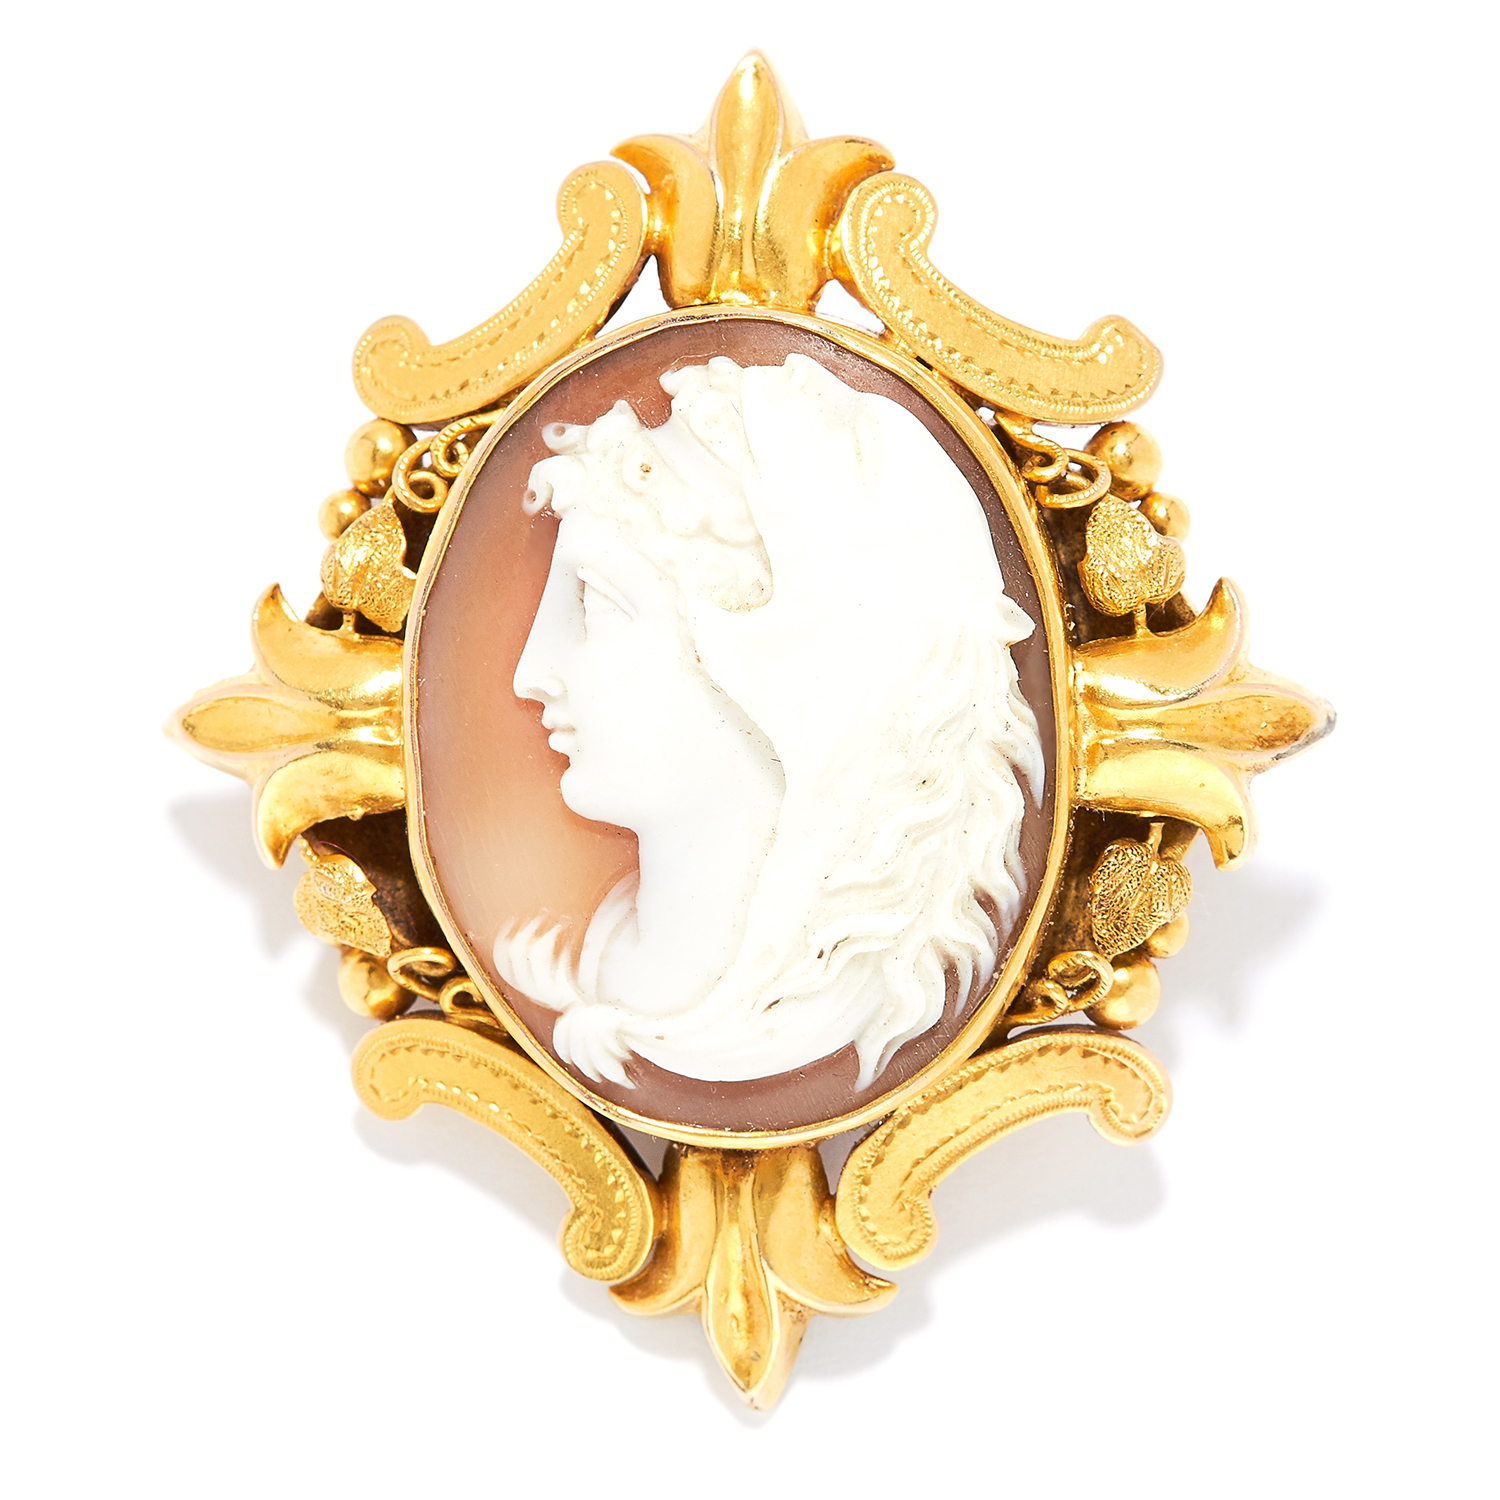 ANTIQUE CARVED CAMEO HAIRWORK MOURNING BROOCH in high carat yellow gold, set with a carved cameo